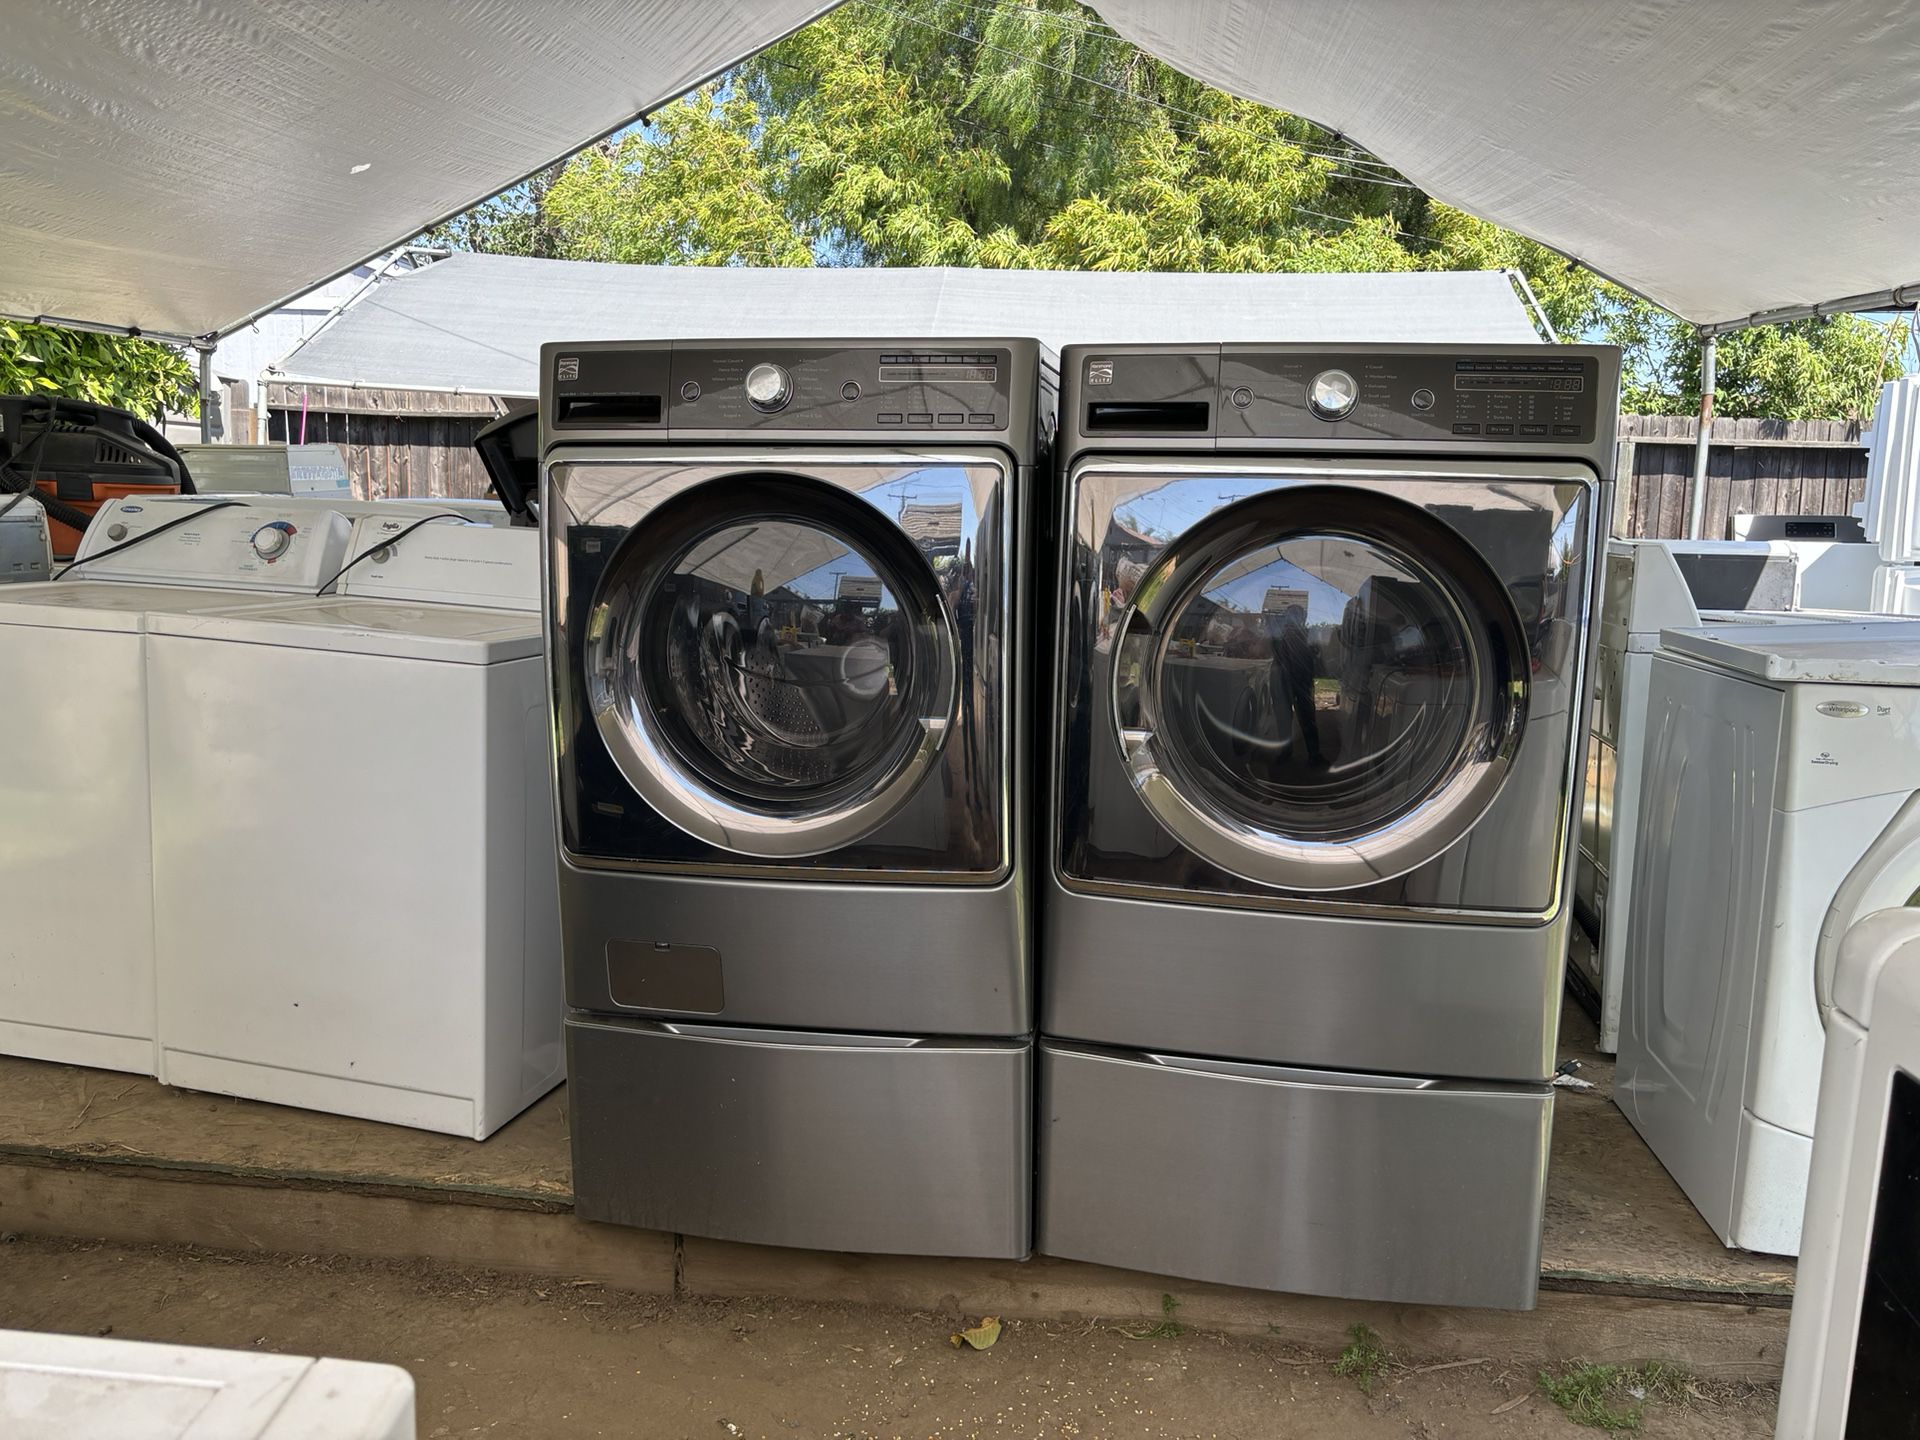 Stainles Steel Washer And Gas Dryer Brand Kenmore Everything Works Well 3 Months Warranty 